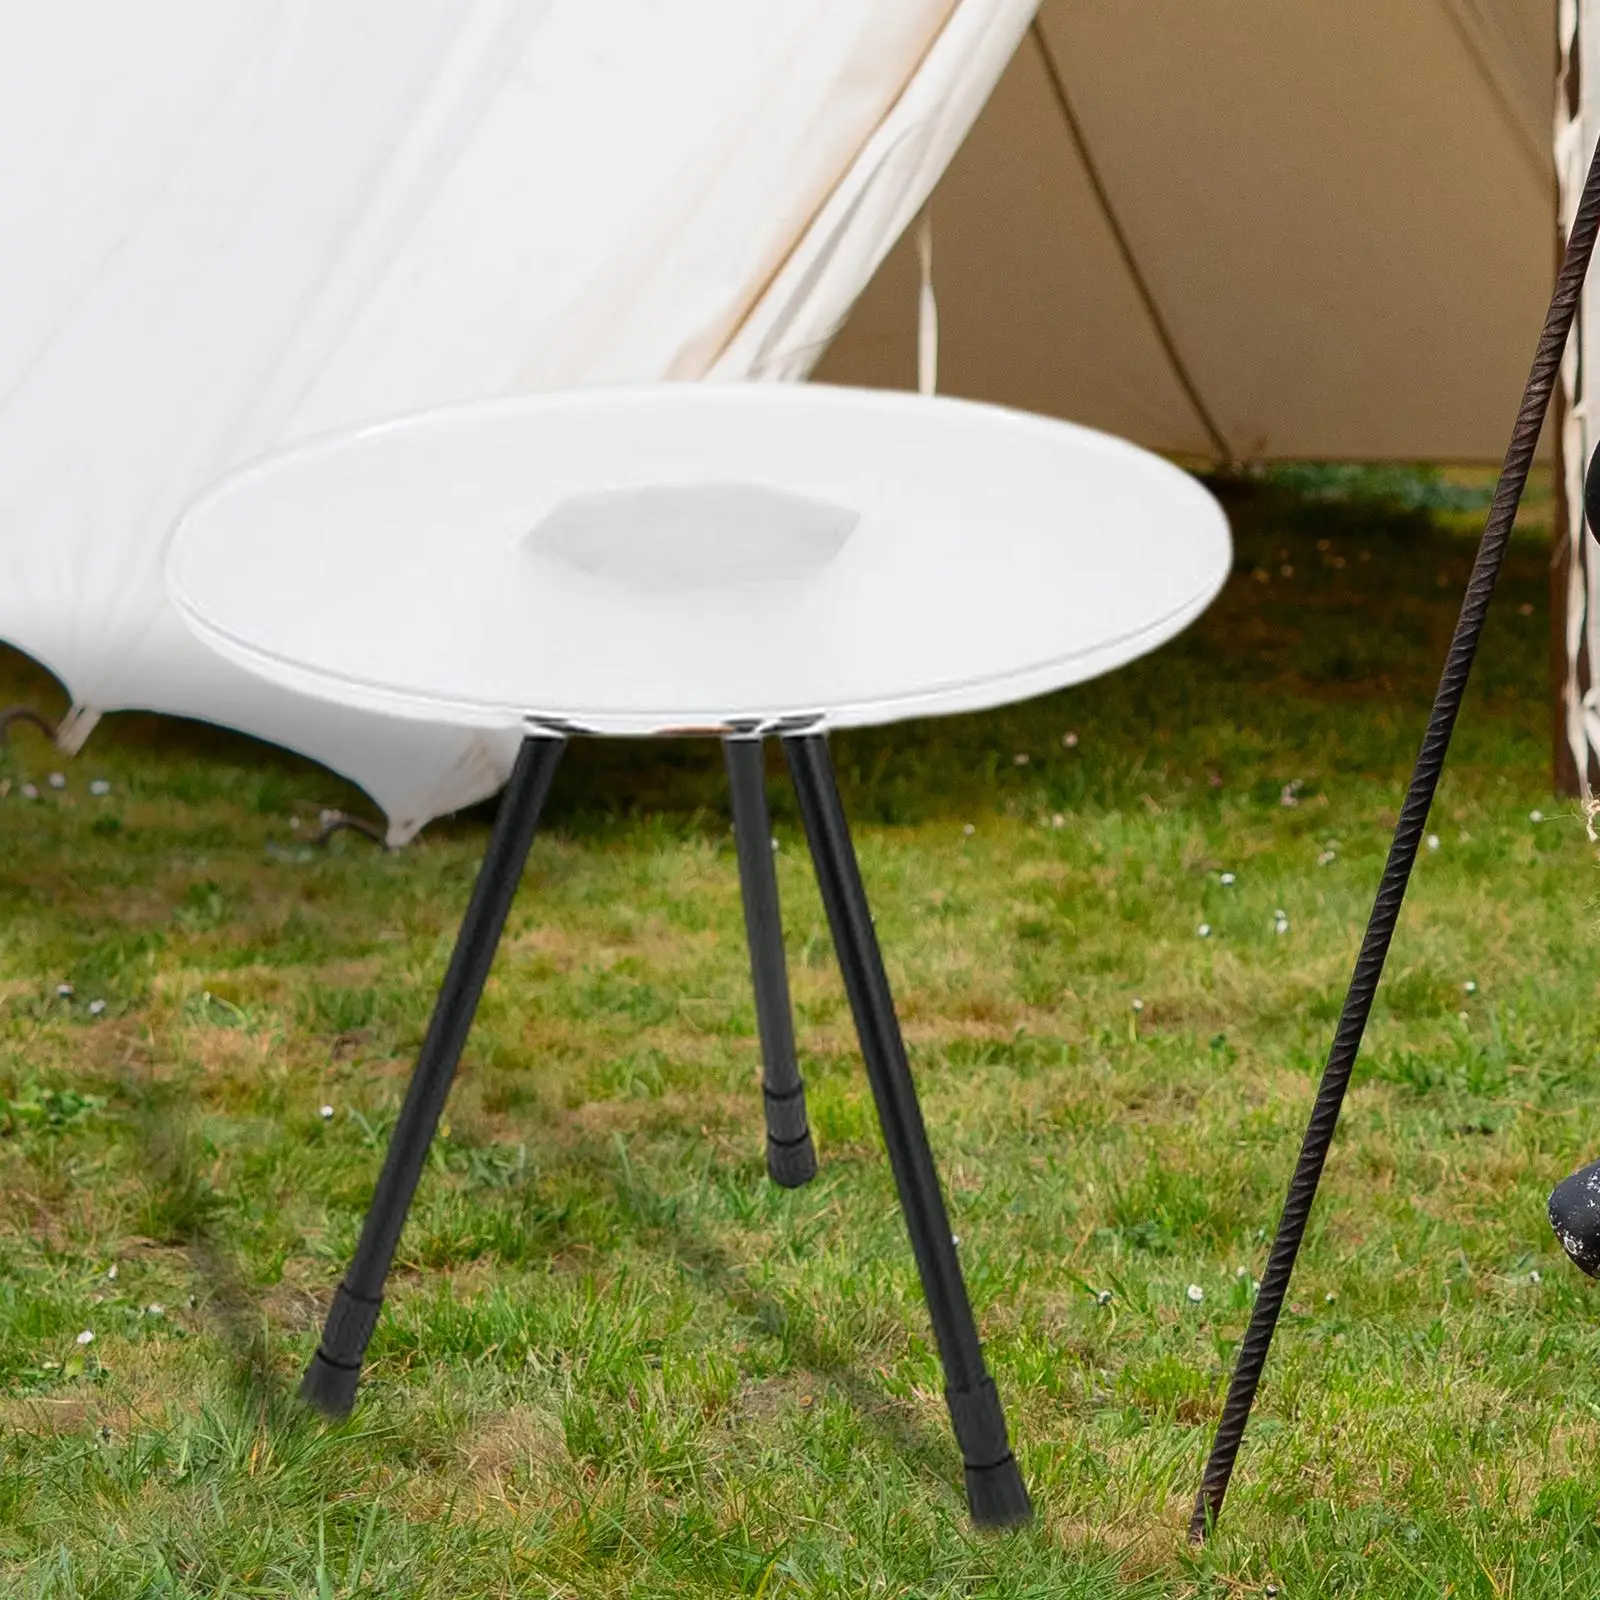 Portable Triangular Round Table Foldable Stable Multifunction Three Legged Telescopic Lift Dining Desk for Garden Picnic Party